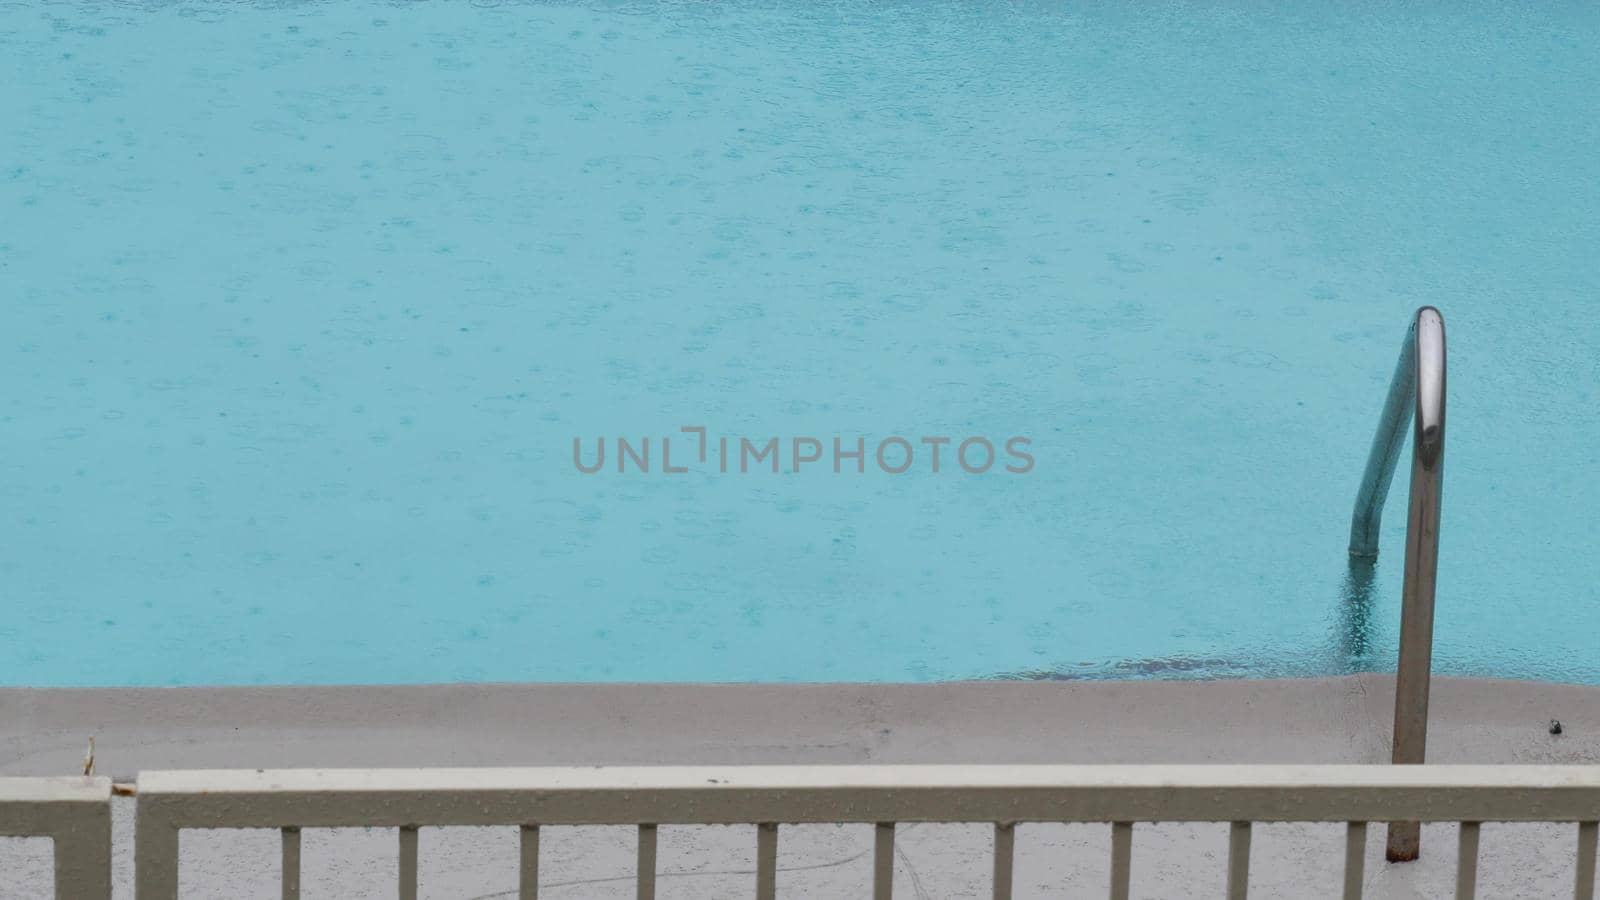 Rain drops falling on water surface of blue swimming pool, rainy day in motel or hotel, California USA. Rainfall on summer vacations, raindrops splashing during monsoon. Seamless looped cinemagraph.